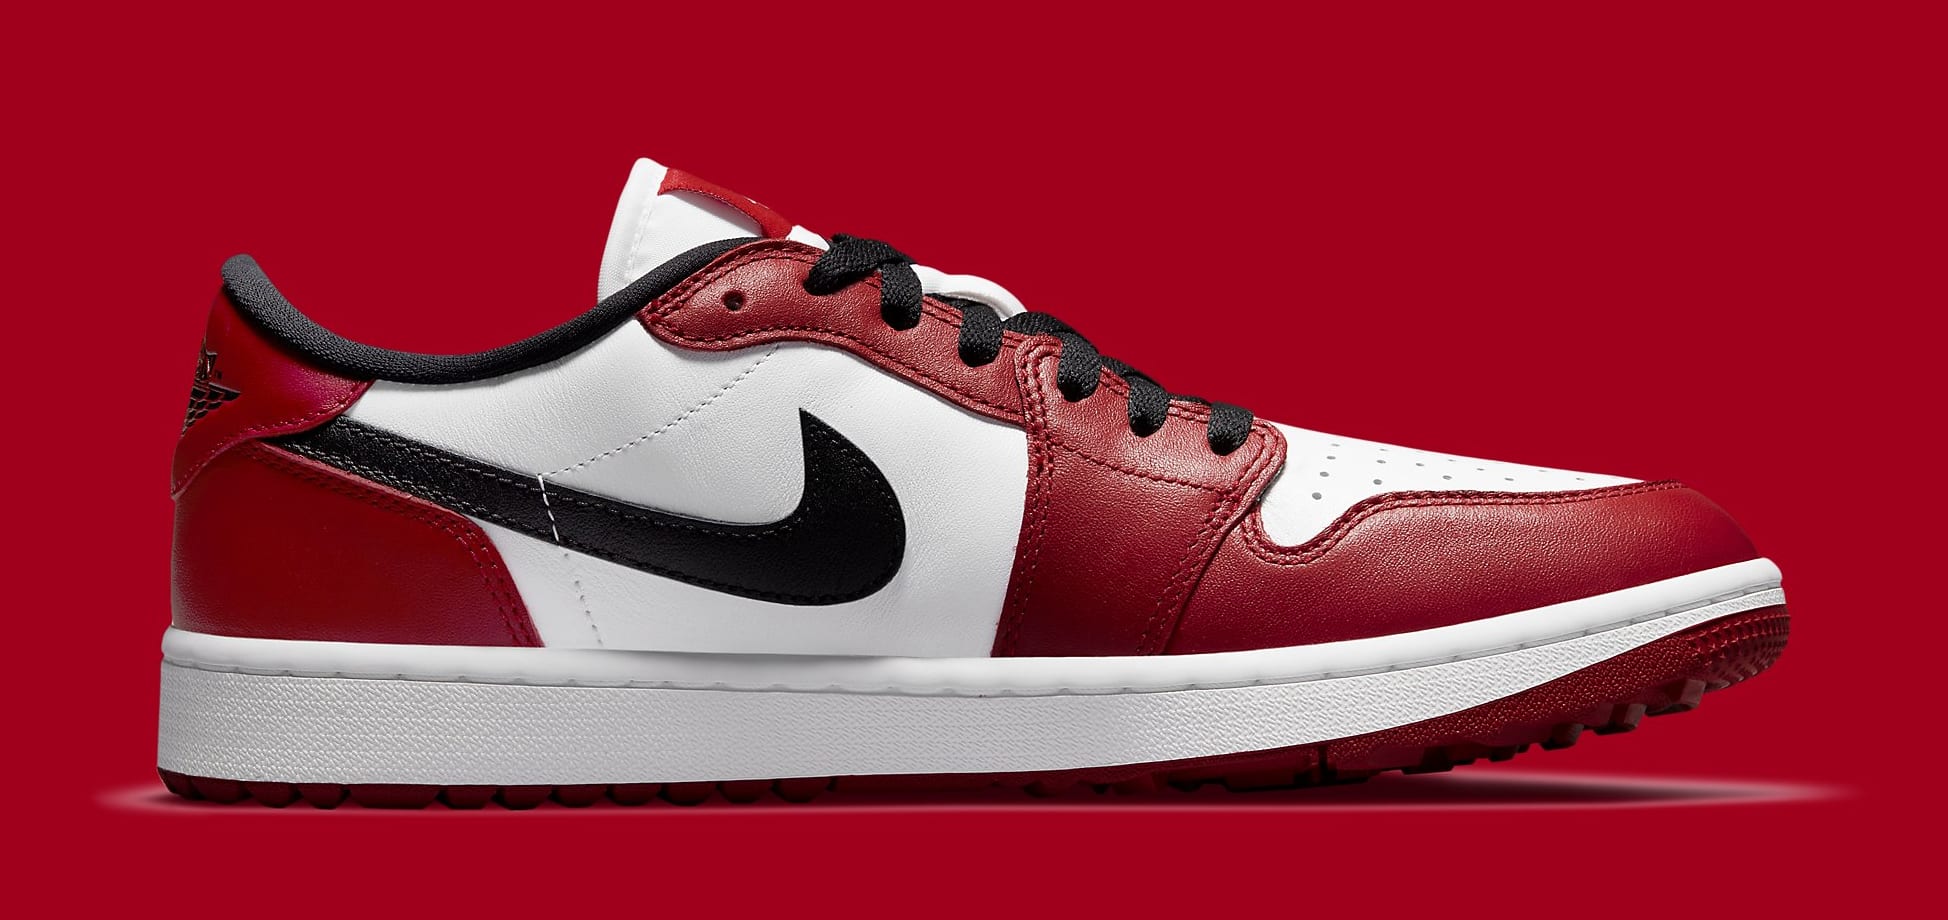 Chicago' Air Jordan 1s Gets Updated For the Golf Course | Complex